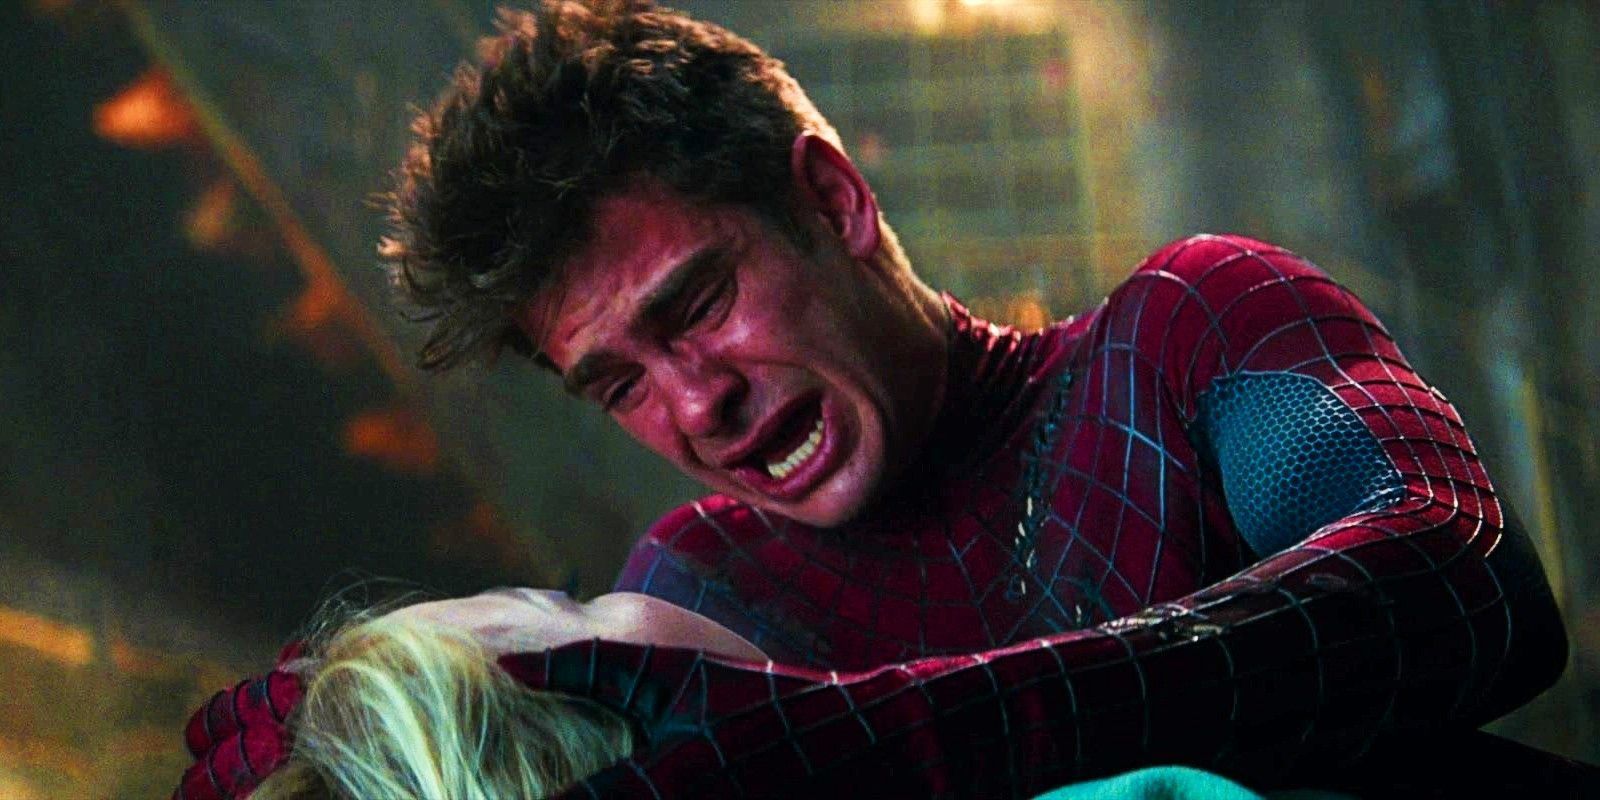 10 Most Tearful Scenes In SpiderMan No Way Home